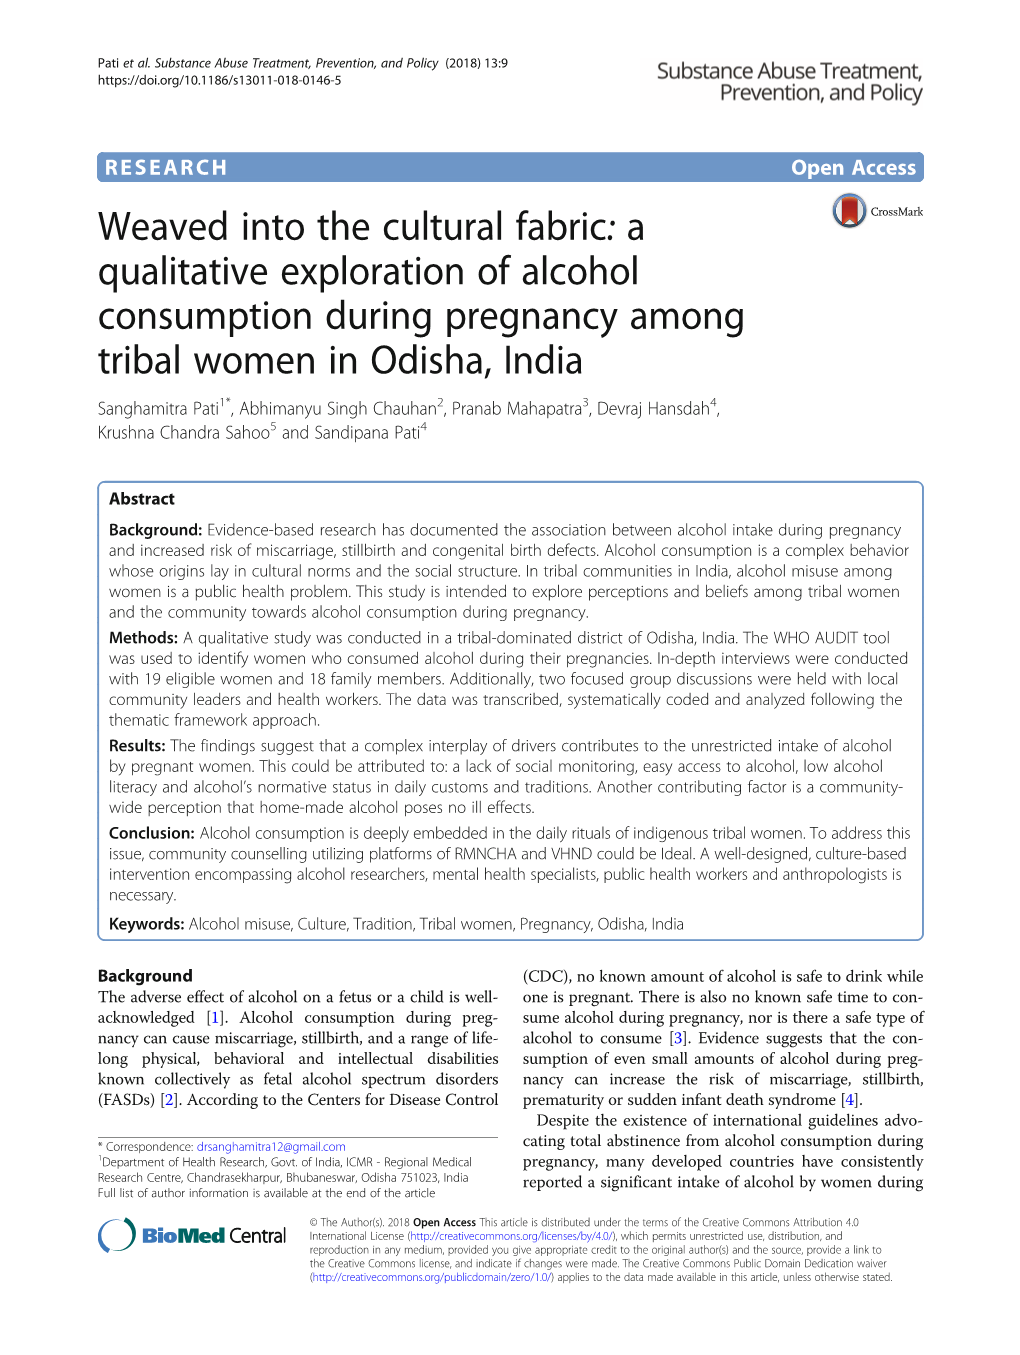 Weaved Into the Cultural Fabric: a Qualitative Exploration of Alcohol Consumption During Pregnancy Among Tribal Women in Odisha